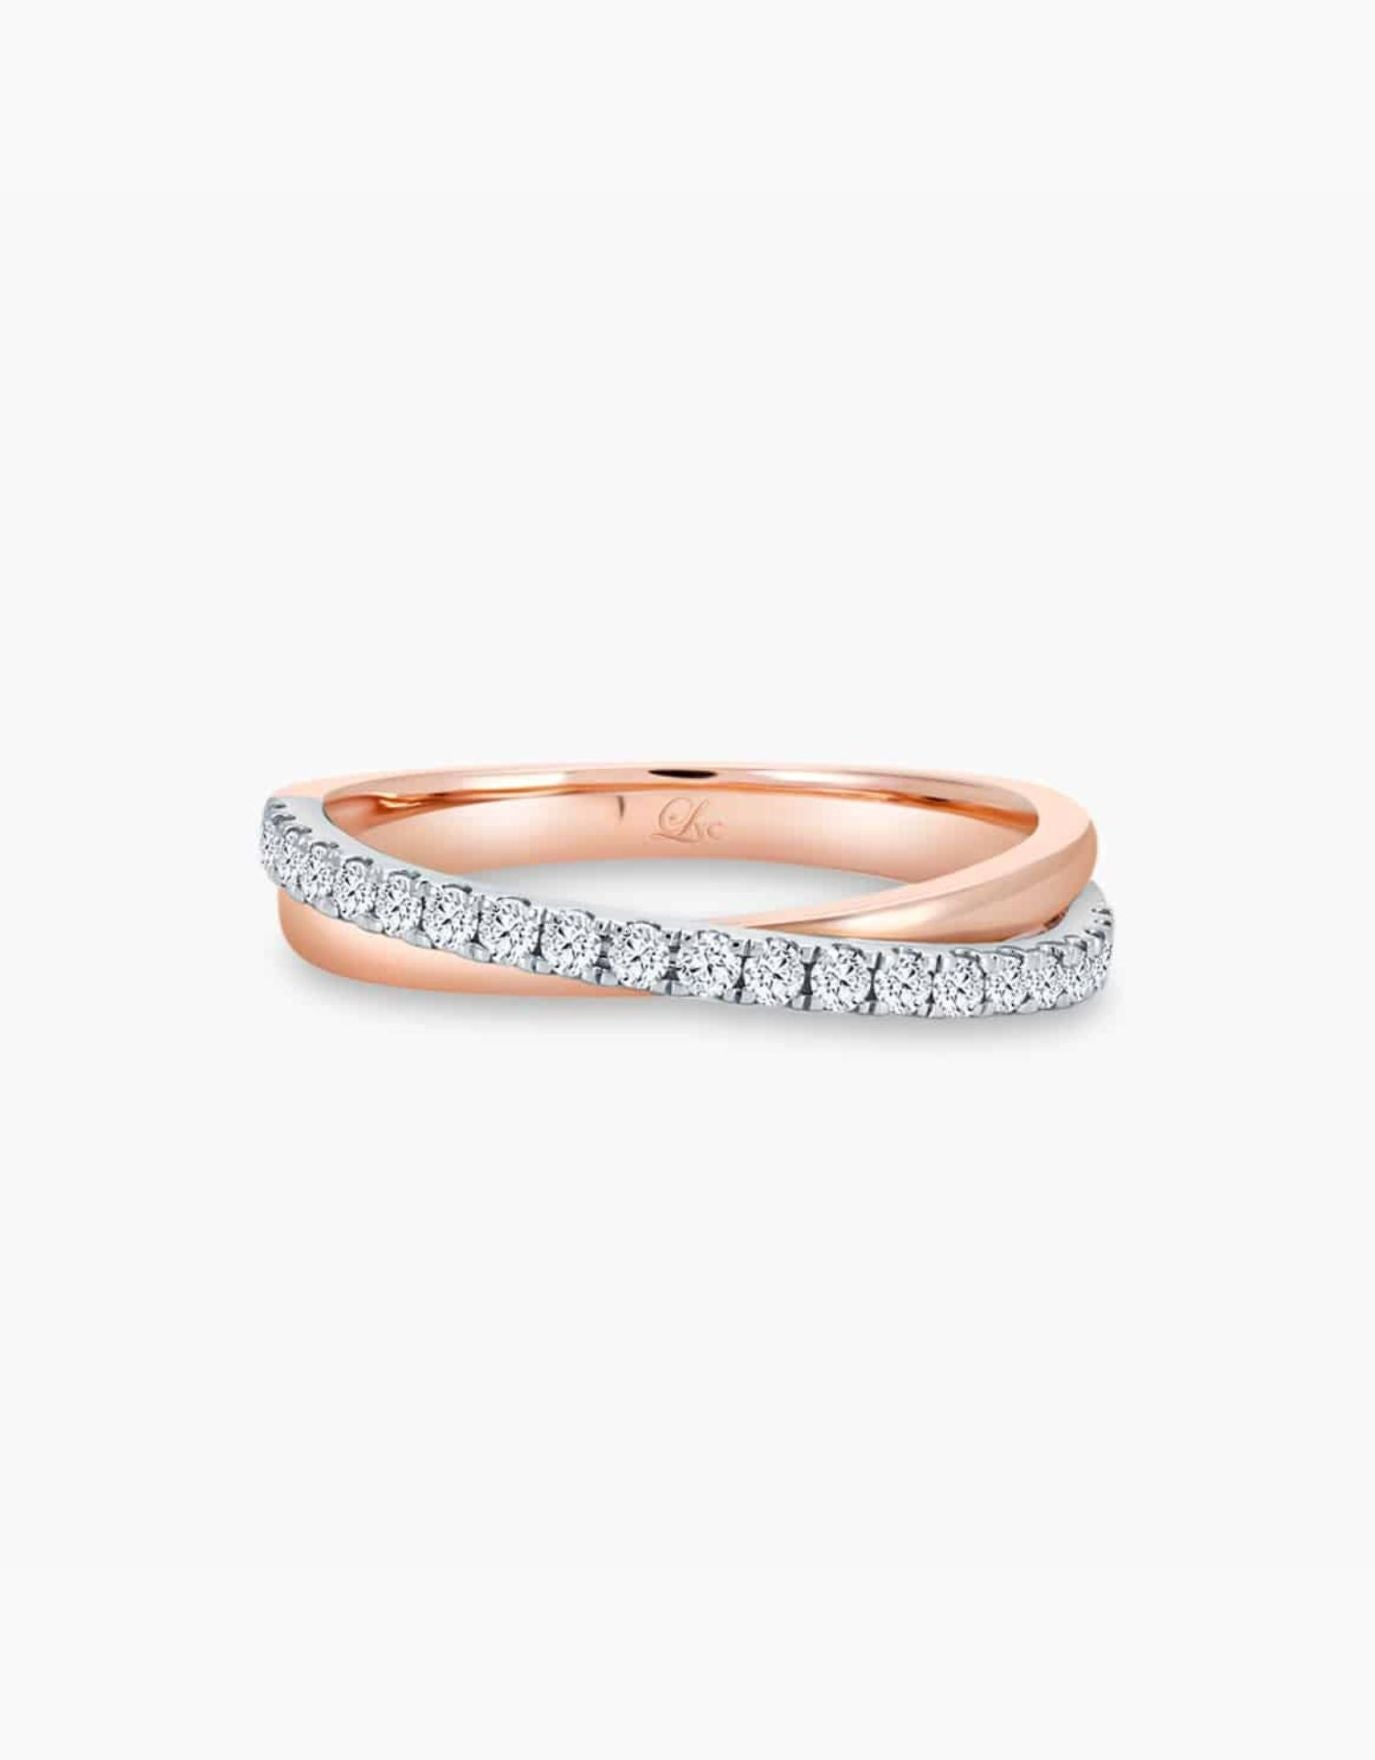 LVC Desirio Duet Wedding Band in Rose Gold and a Band of Diamonds